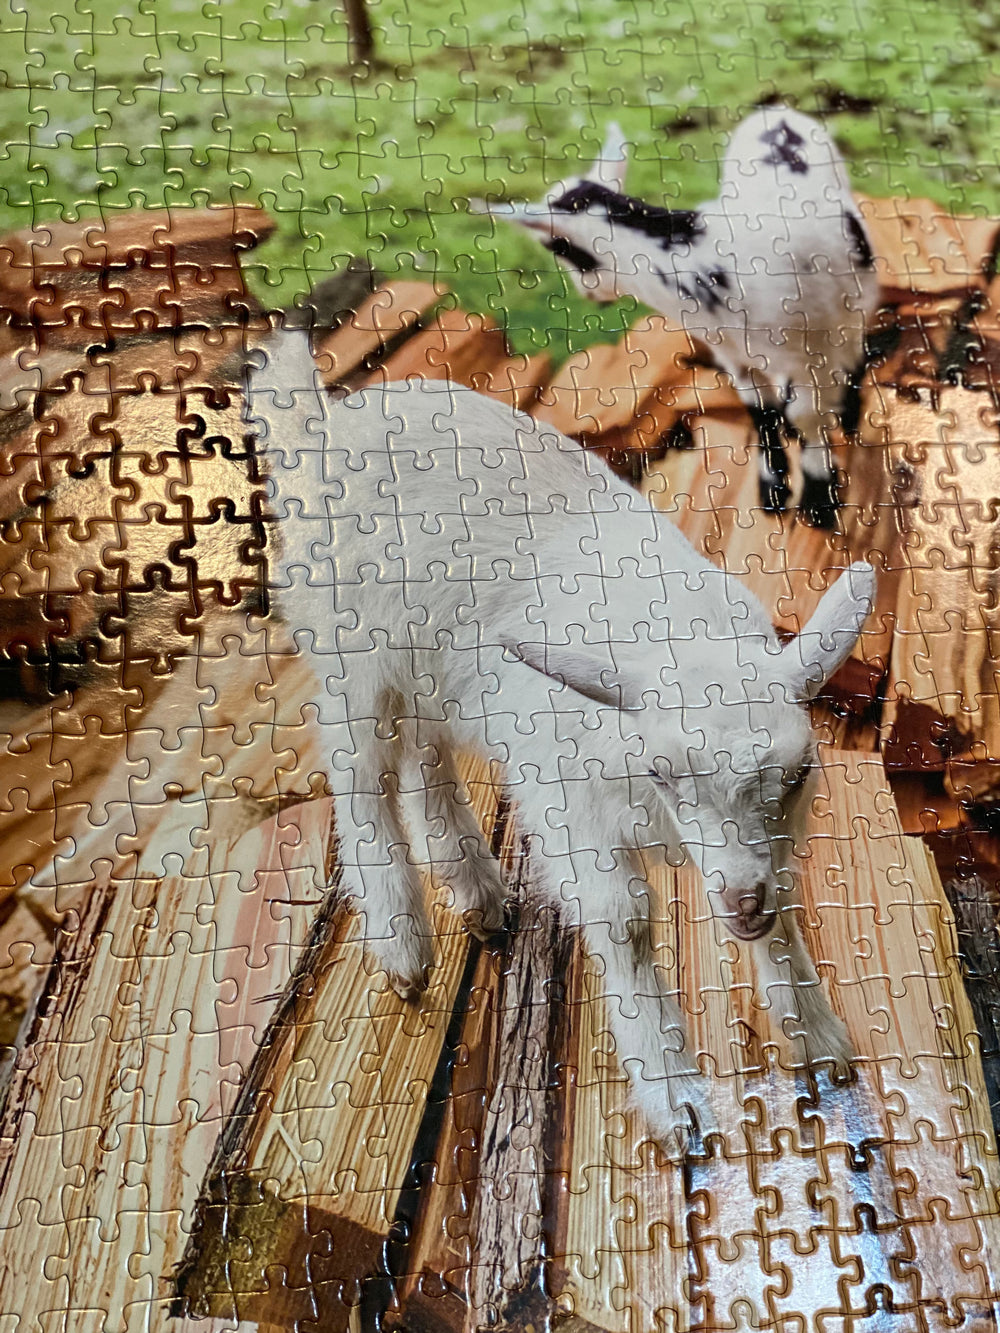 500 Piece Jigsaw Puzzle | Lolly & Jelly On the Wood Pile | ADVANCED